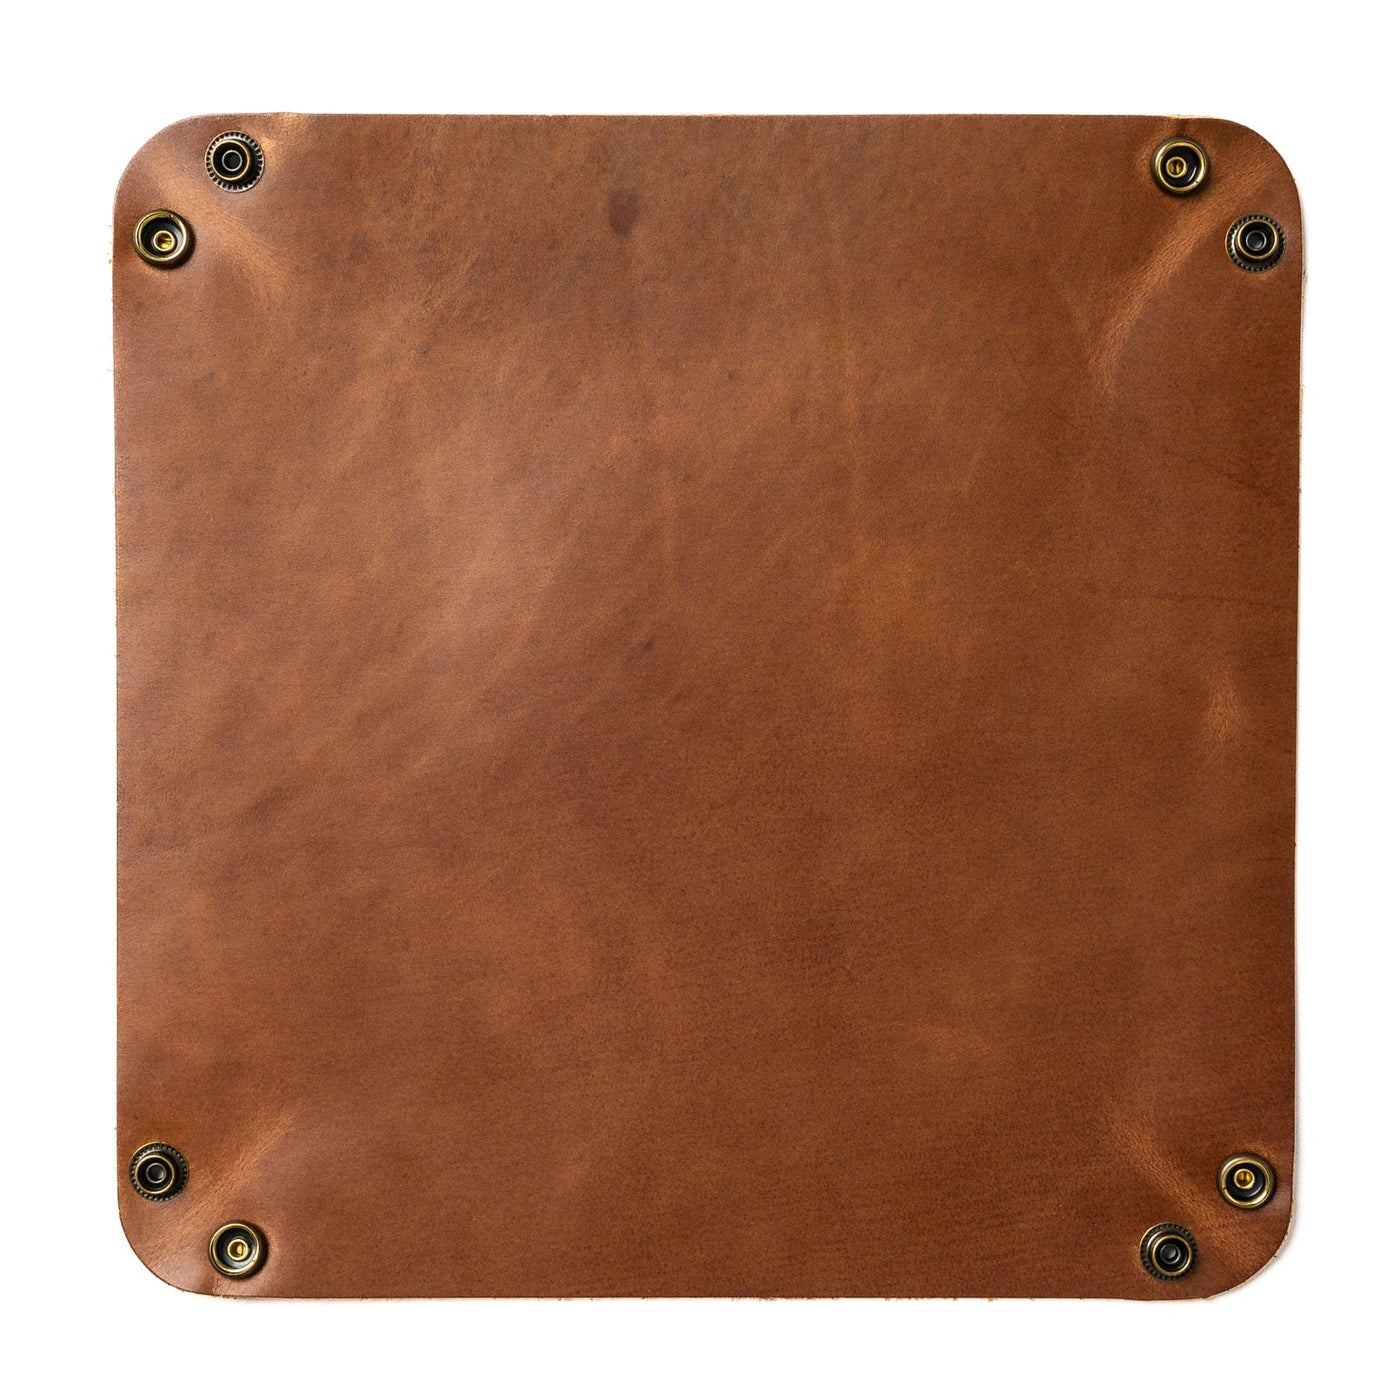 Leather Valet Tray - Natural Popov Leather